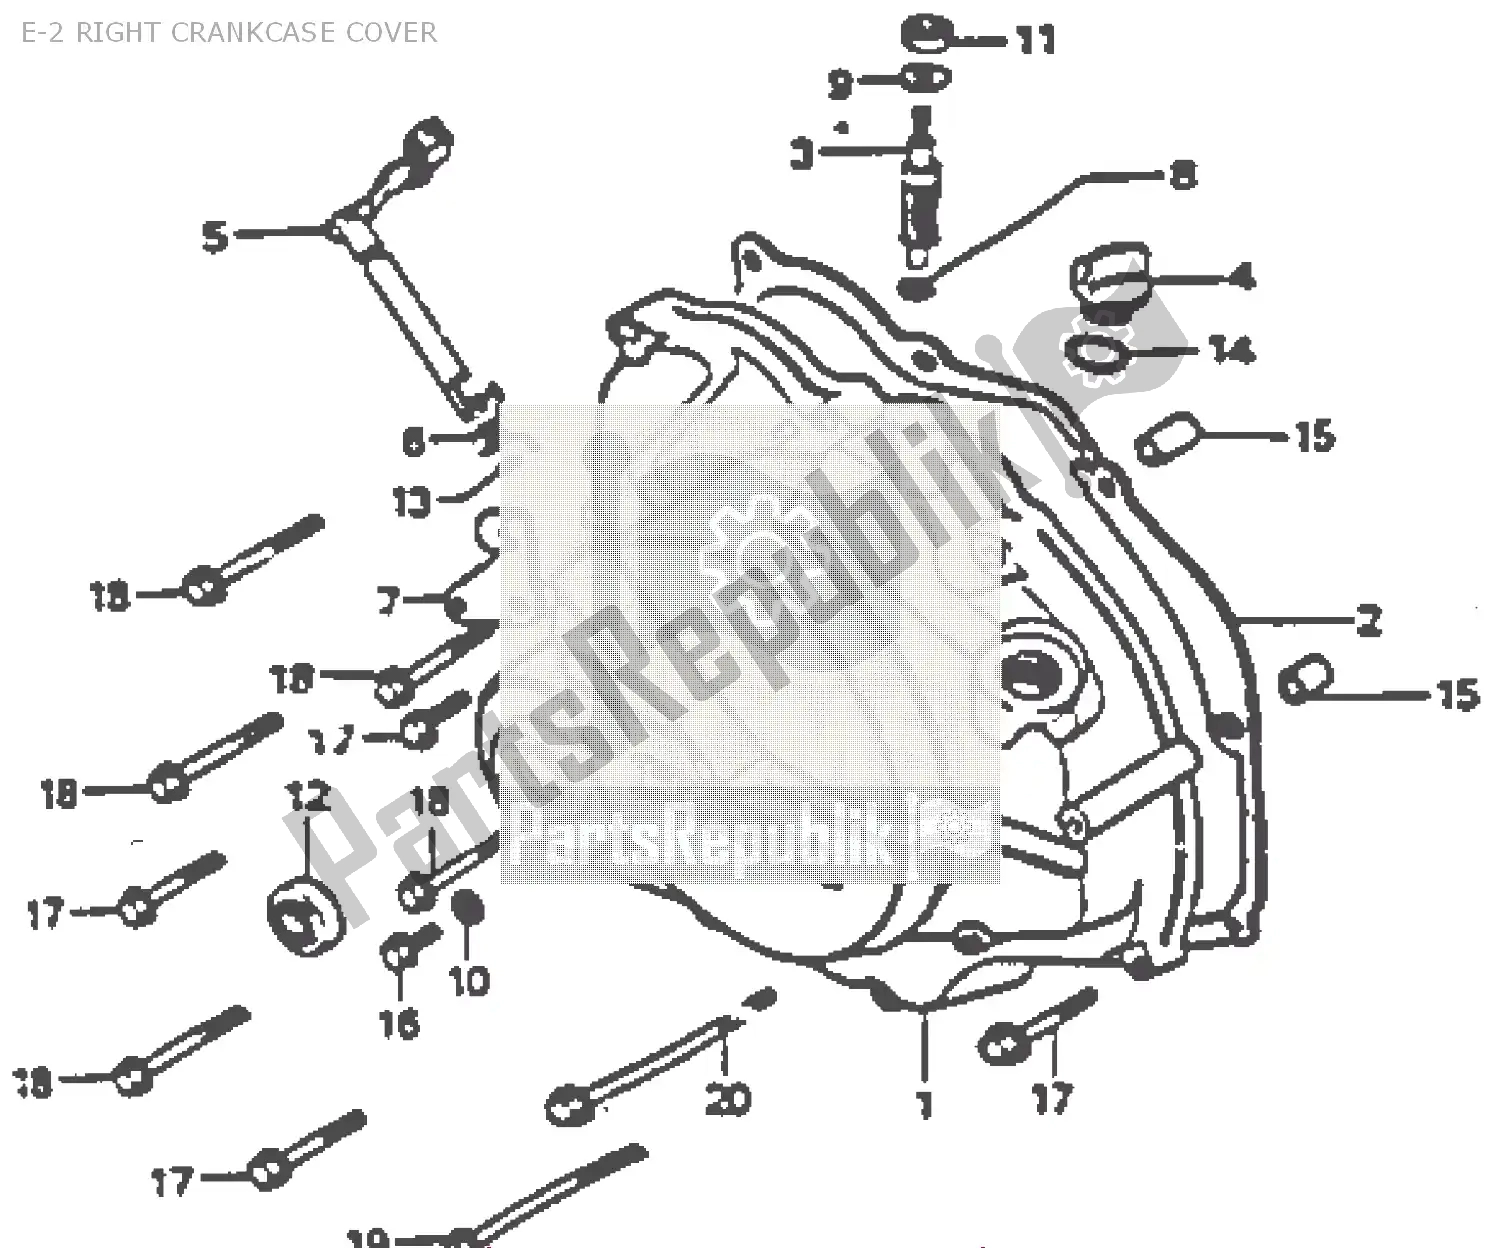 All parts for the E-2 Right Crankcase Cover of the Honda MBX 50 1985